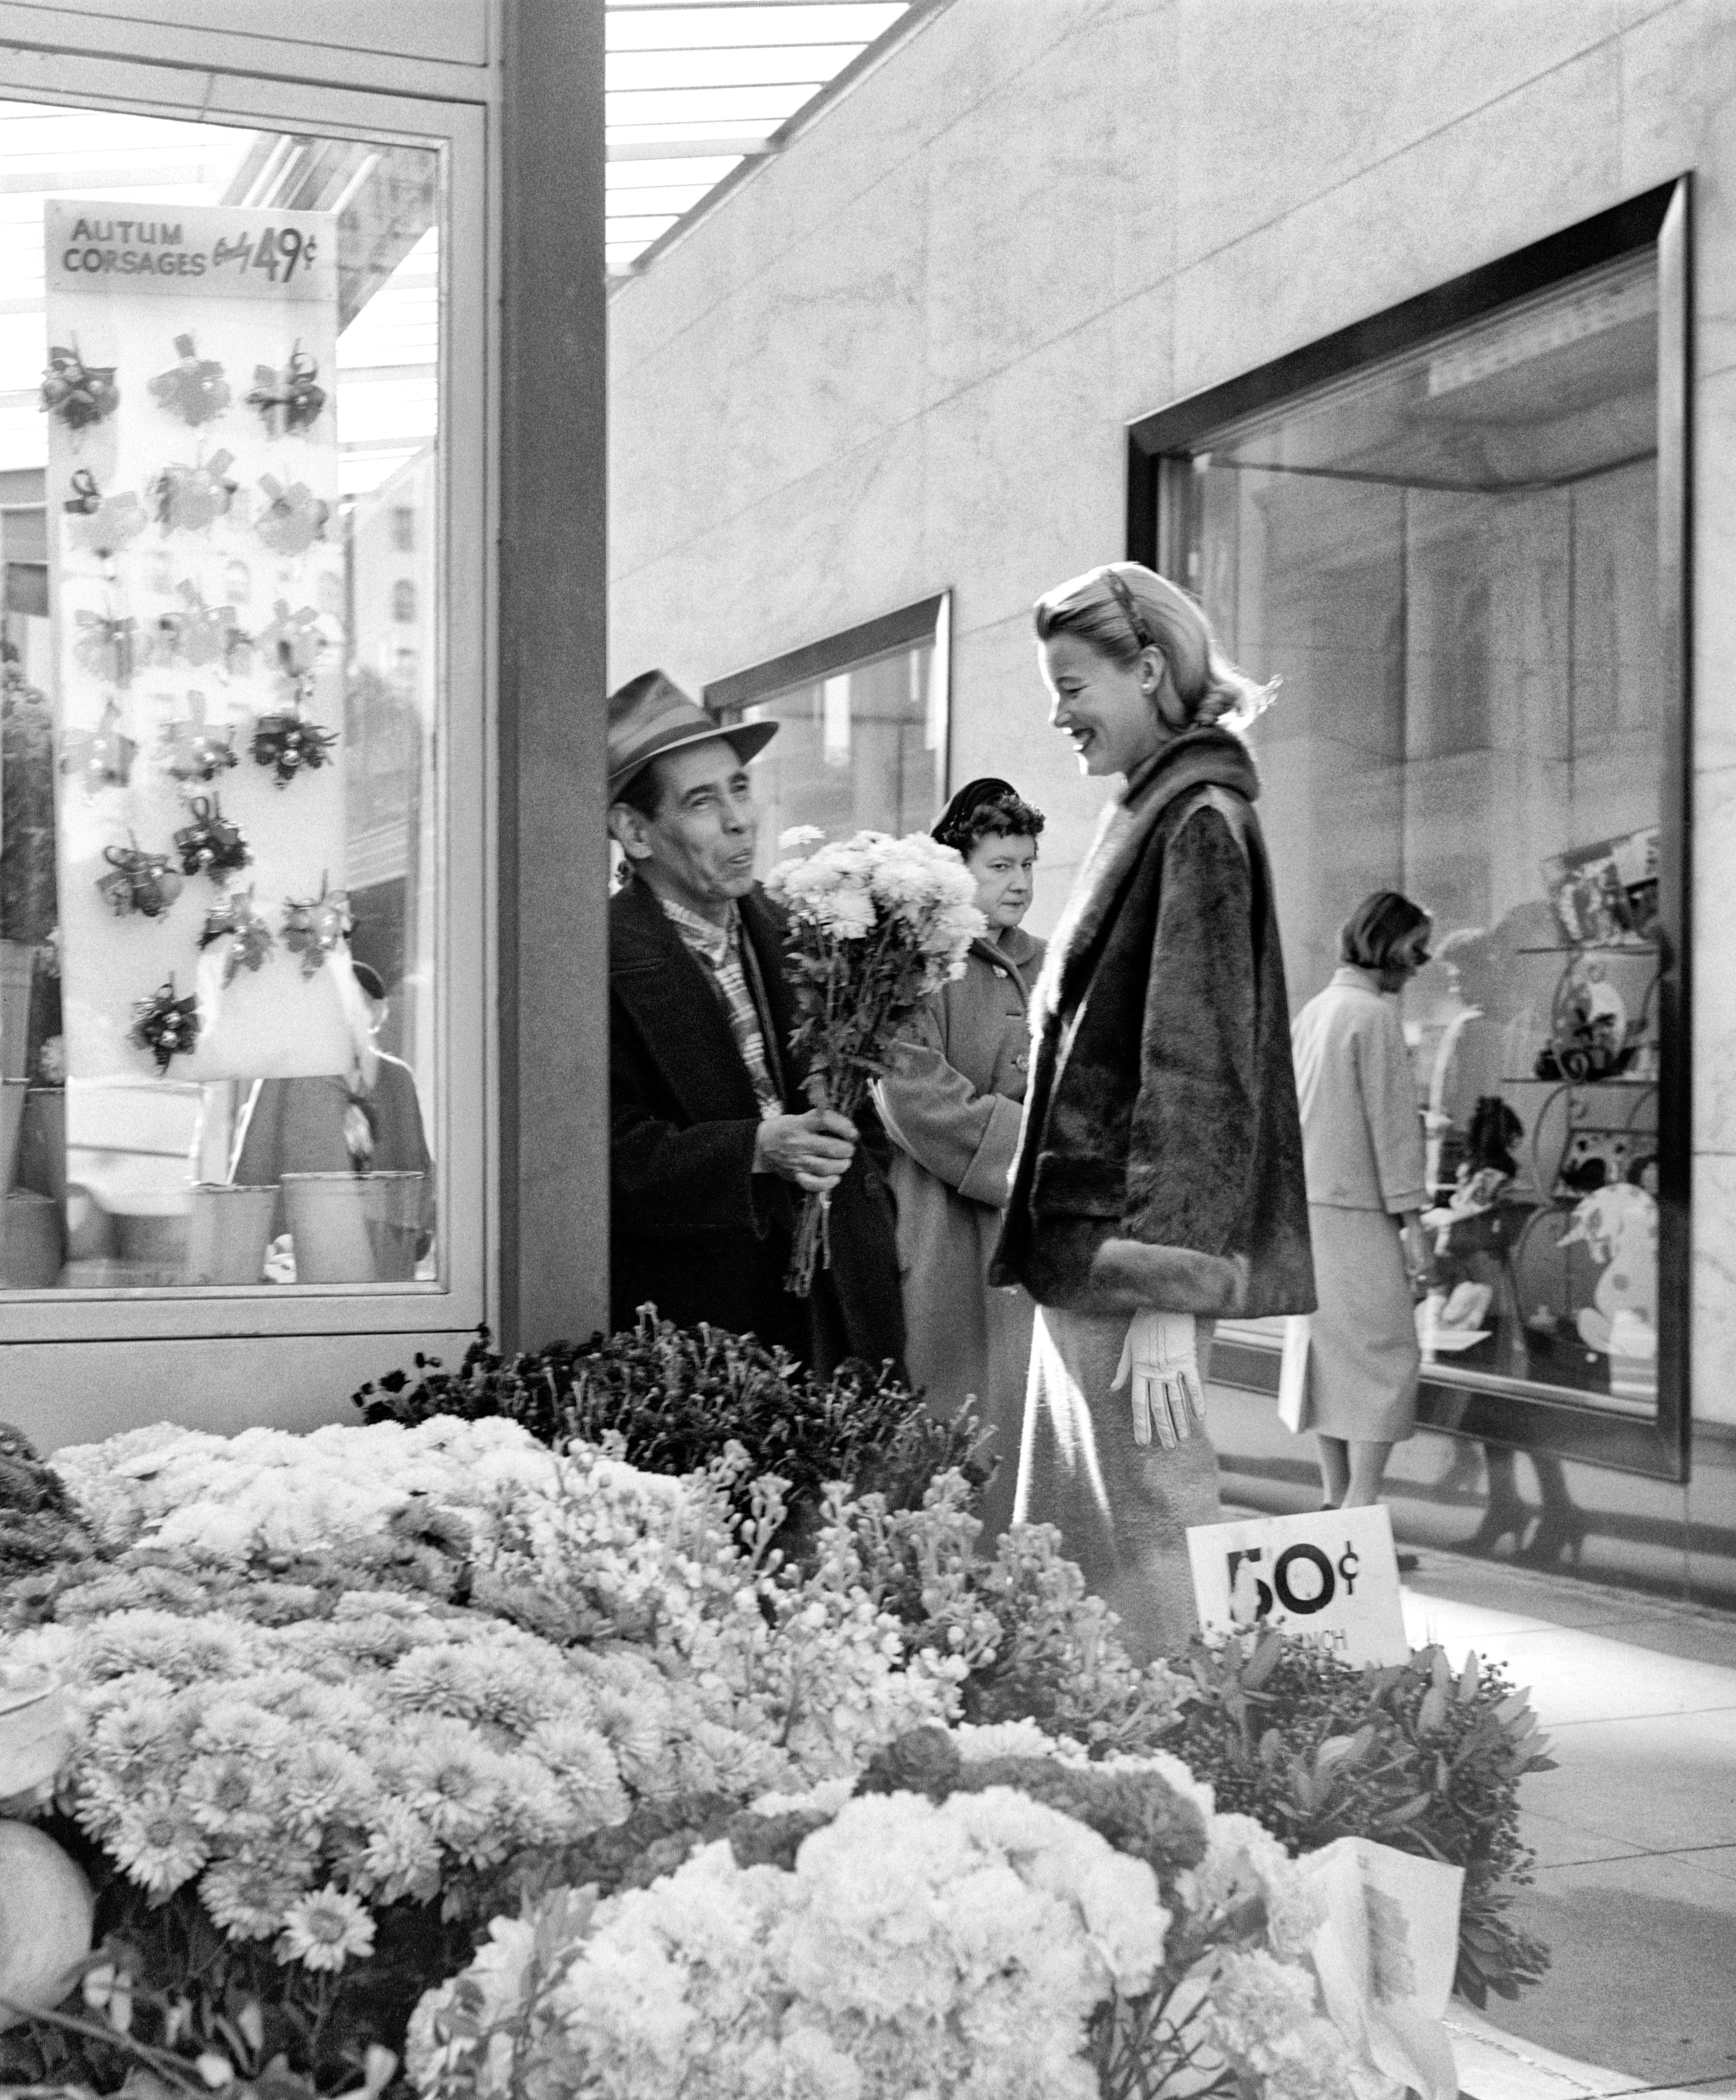 Fred Lyon Black and White Photograph - Union Square Flower Stand